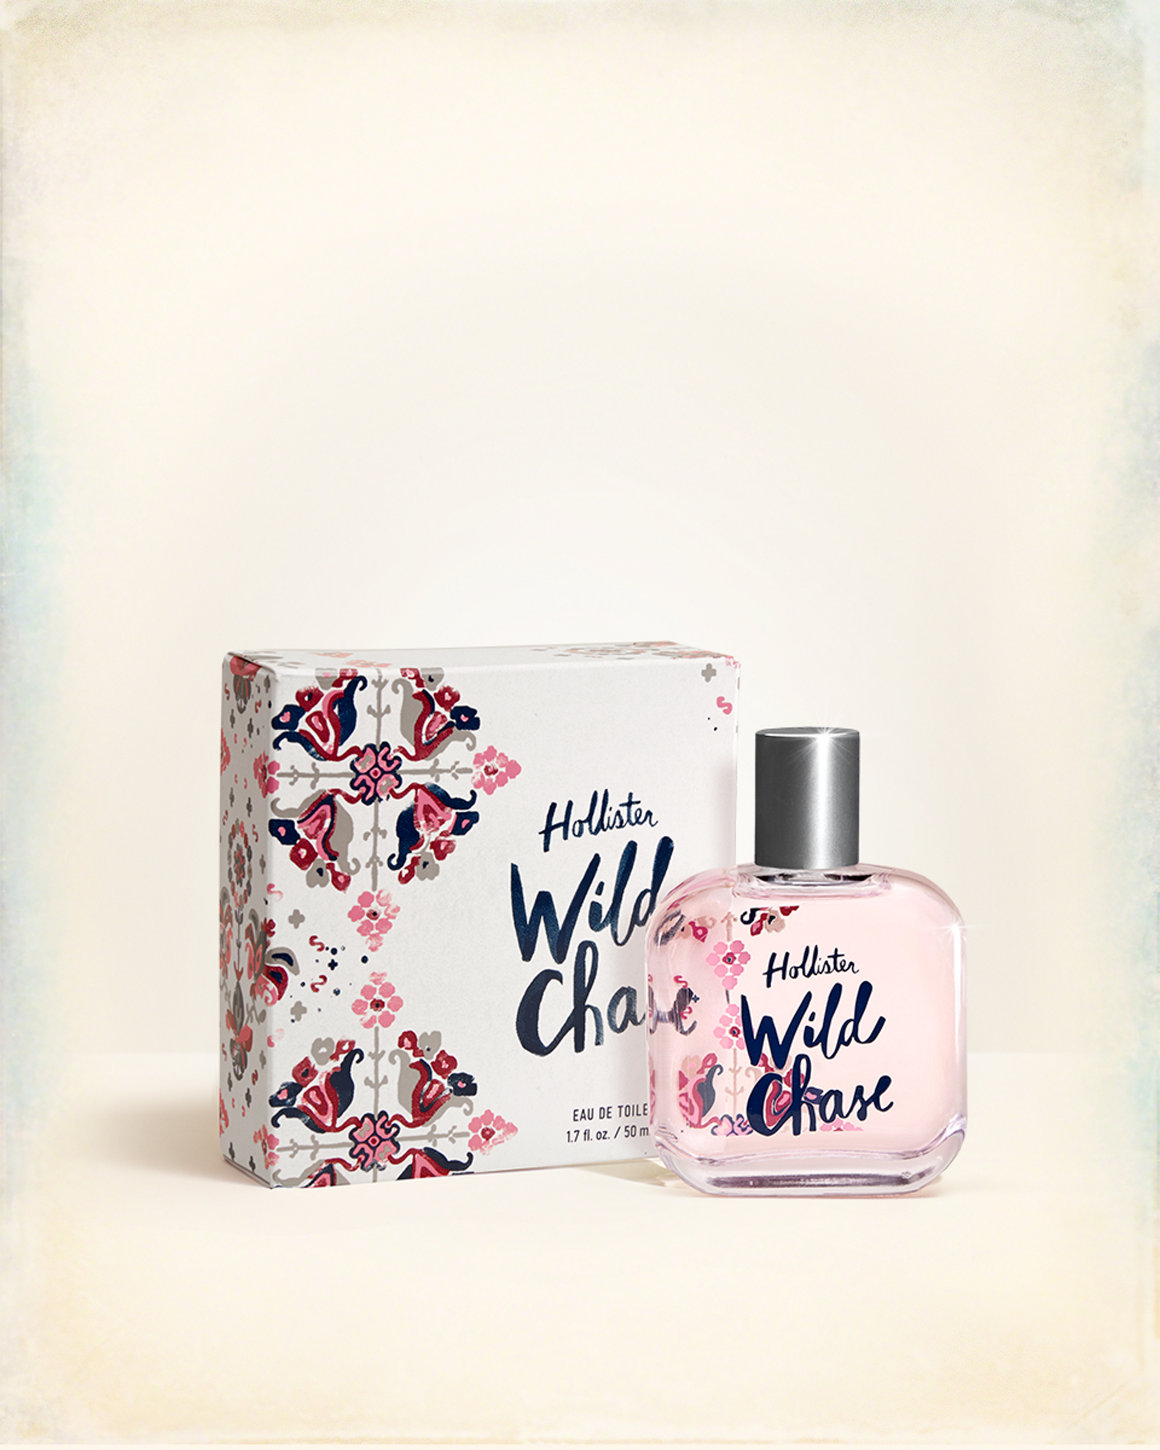 Wild Chase Hollister perfume - a 